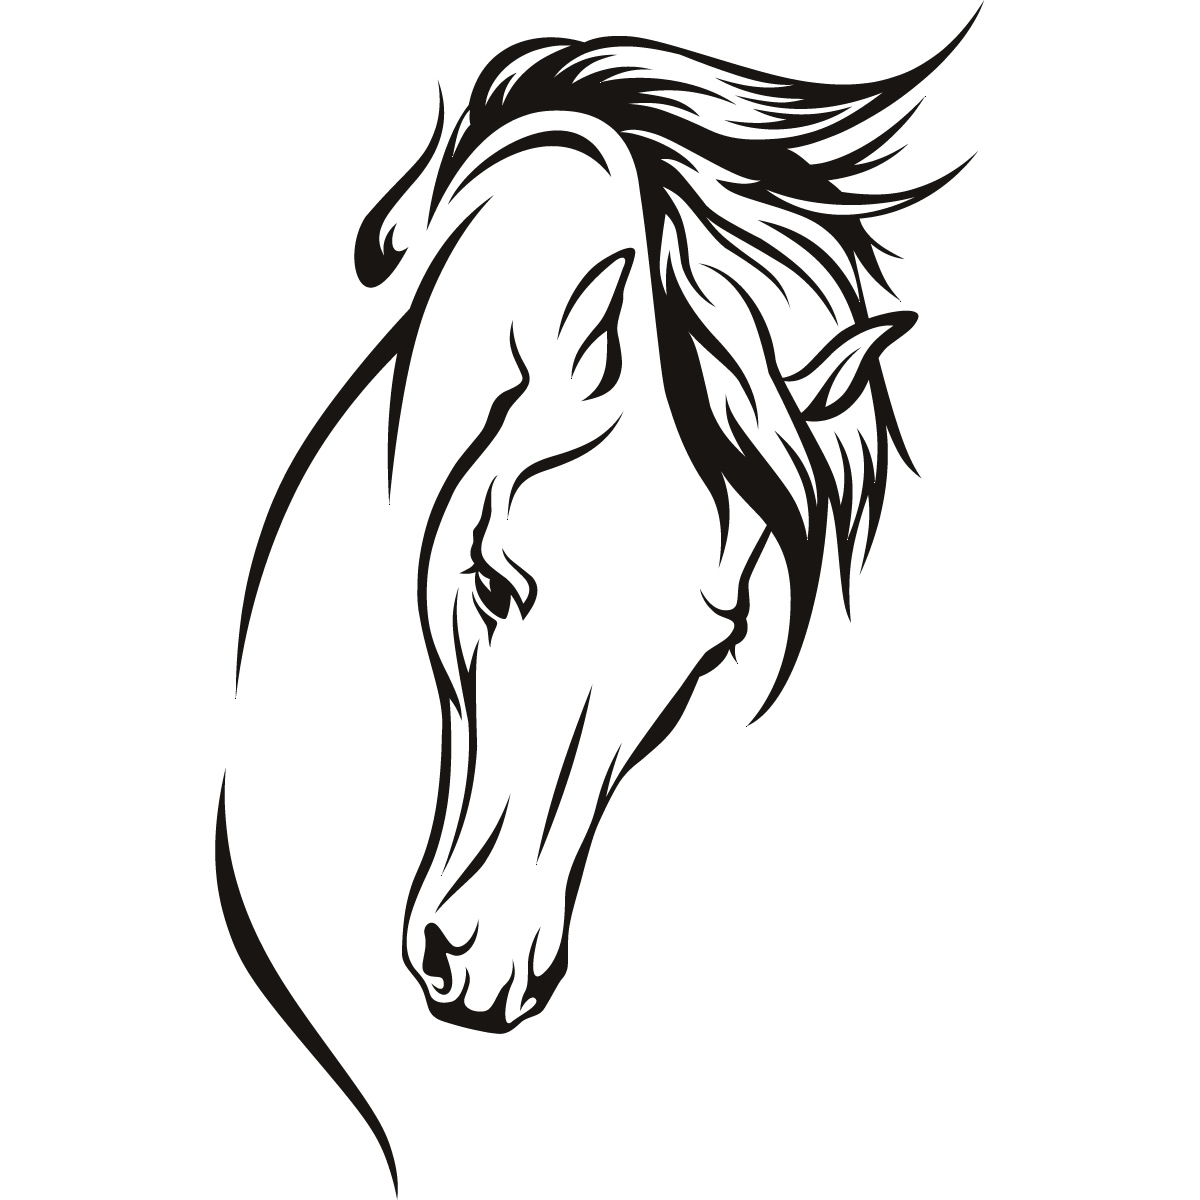 Horse Head Silhouette Coloring Page Vector Set Of Horse Head ...